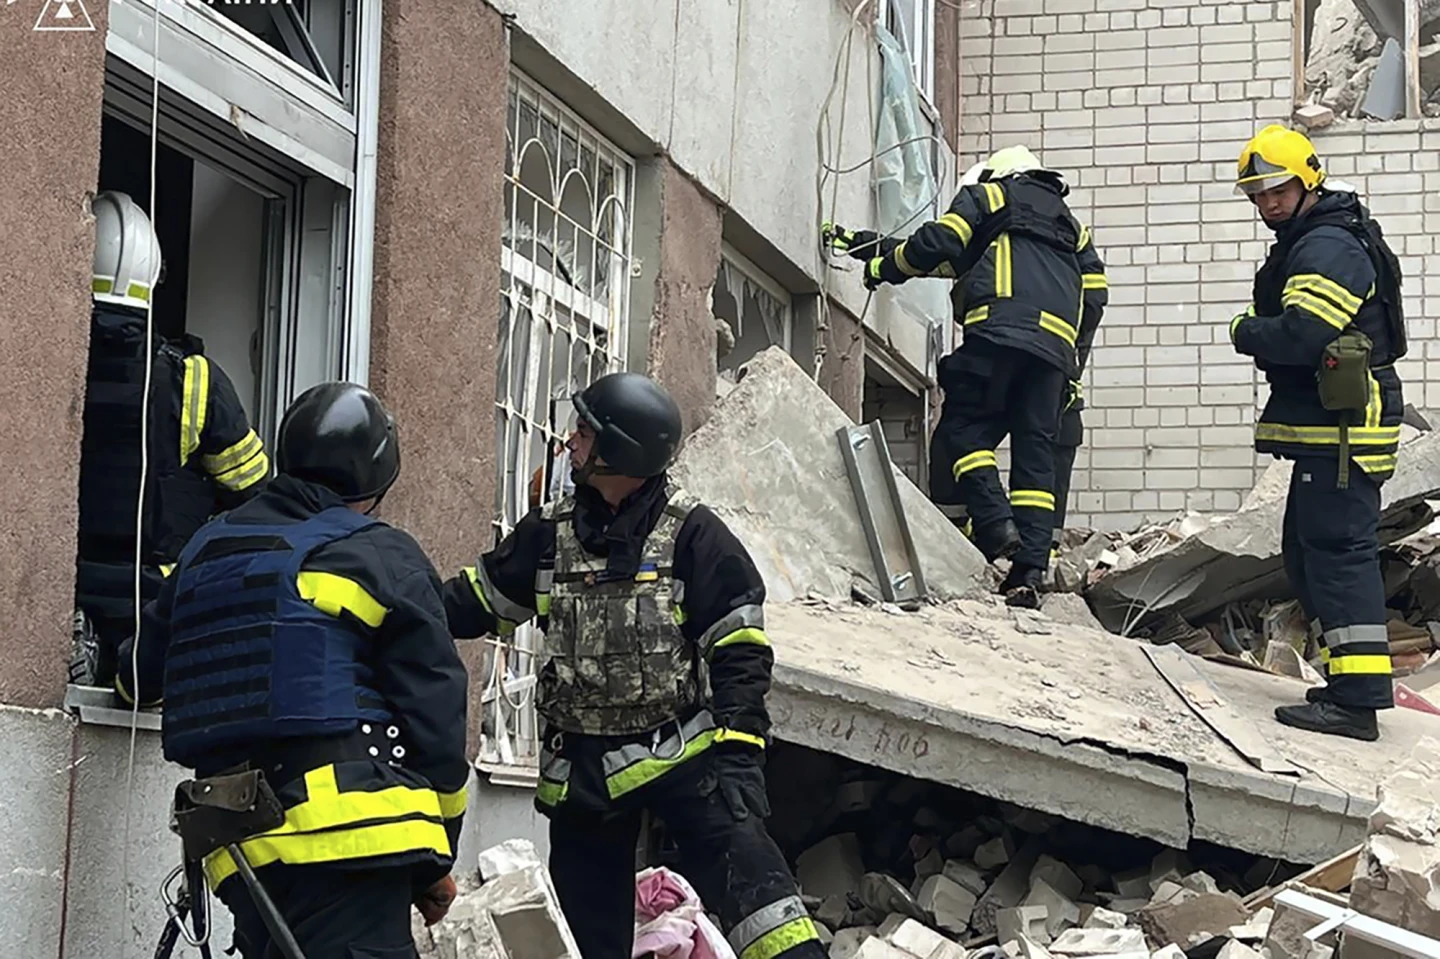 Russian missiles slam into a Ukraine city and kill 14 people as the war approaches a critical stage